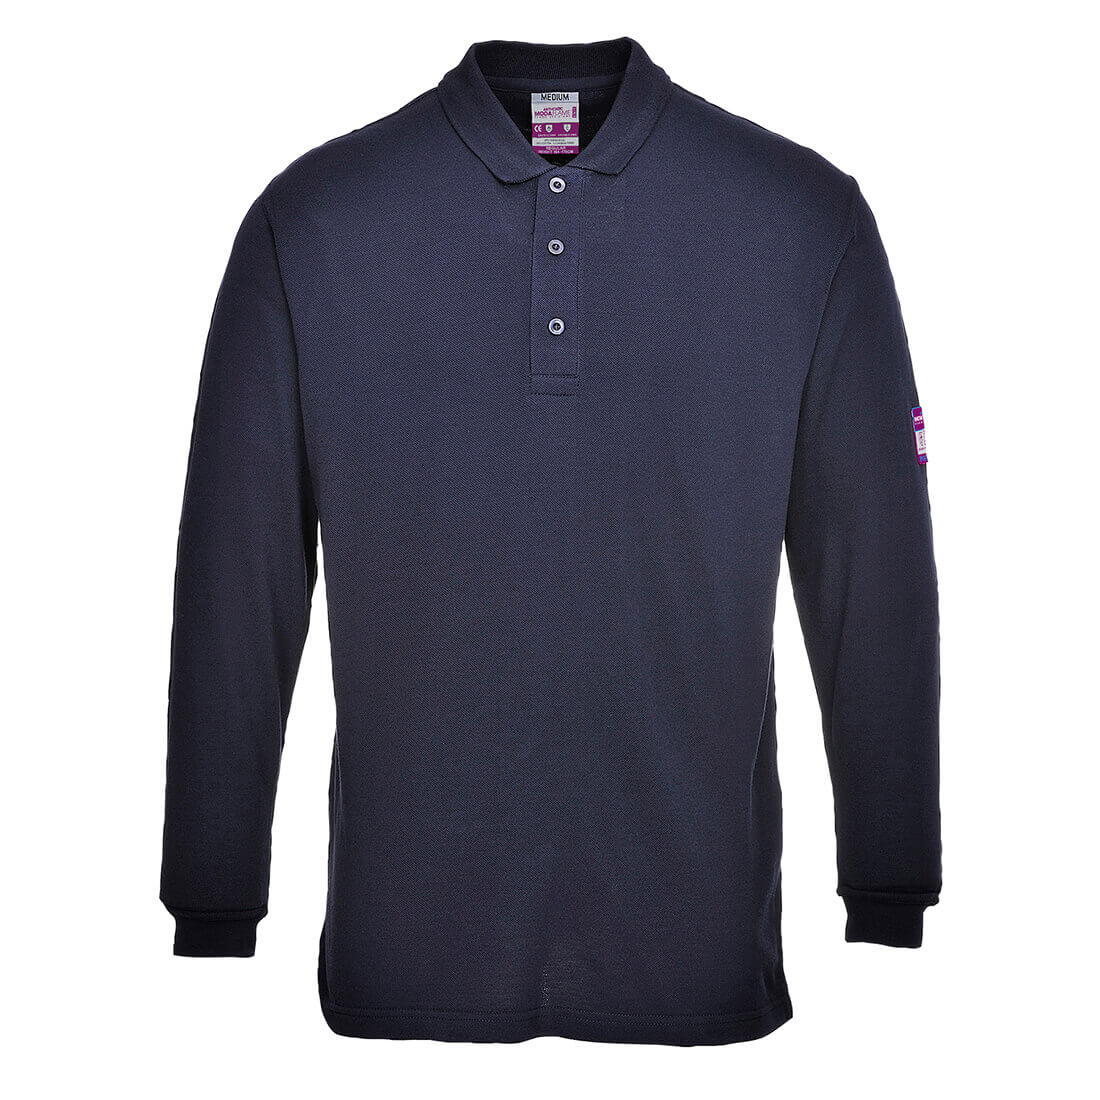 Image of Modaflame Mens Flame Resistant Antistatic Long Sleeve Polo Shirt Navy XS